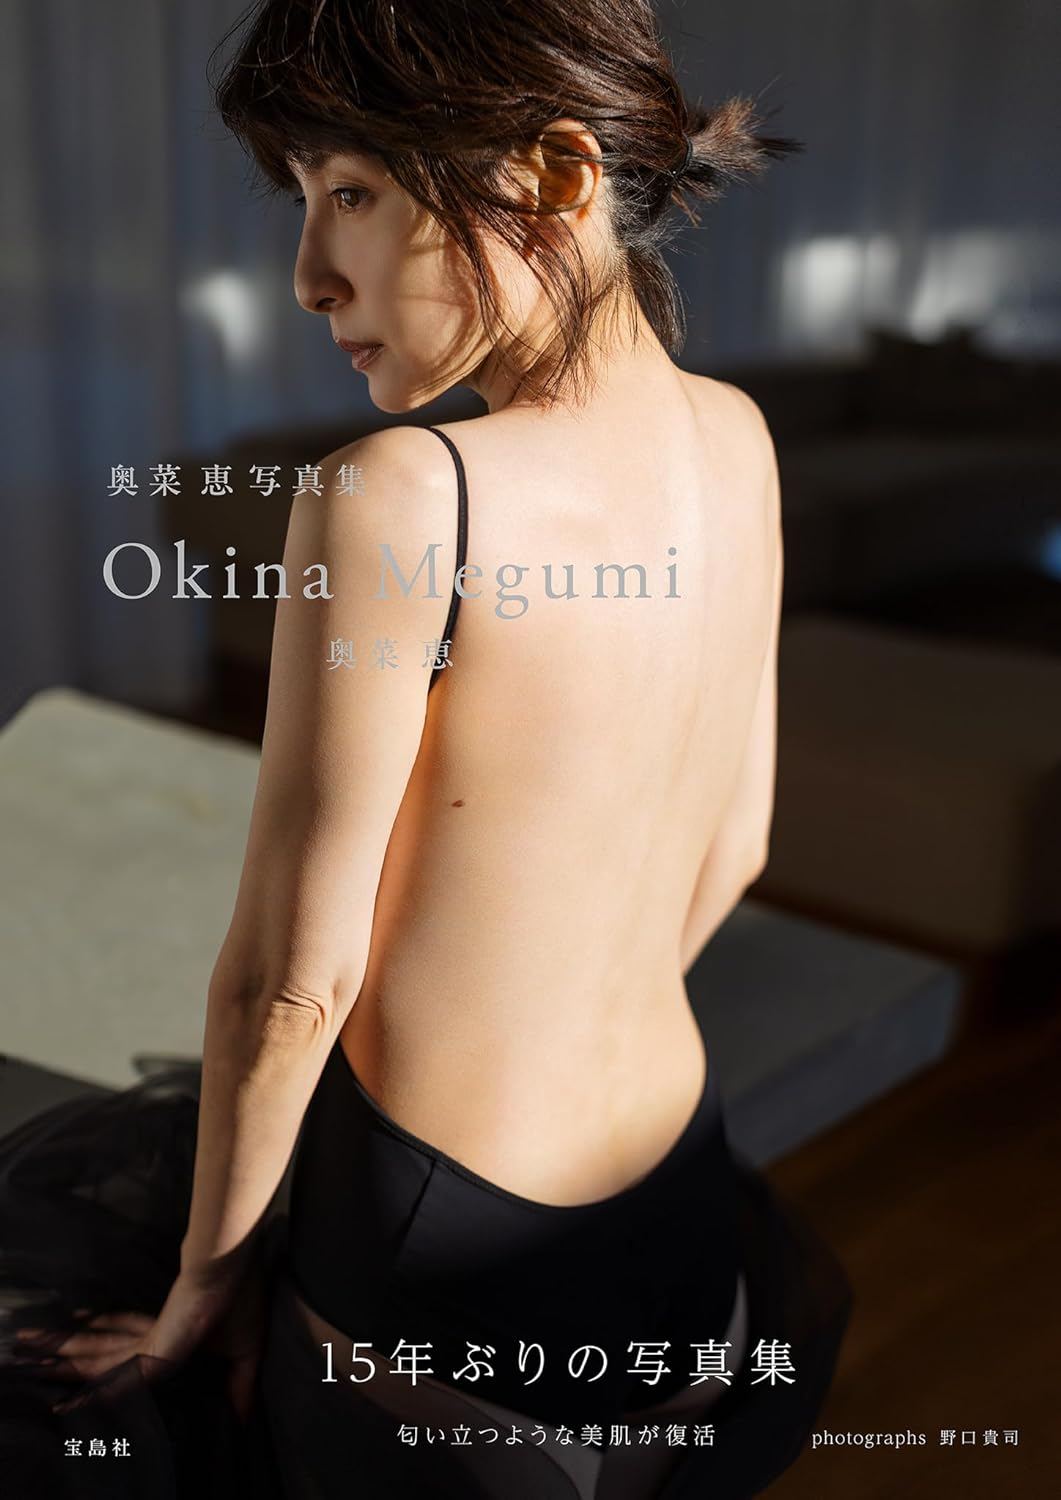 Megumi Okina Photo Collection - Bitcoin & Lightning accepted